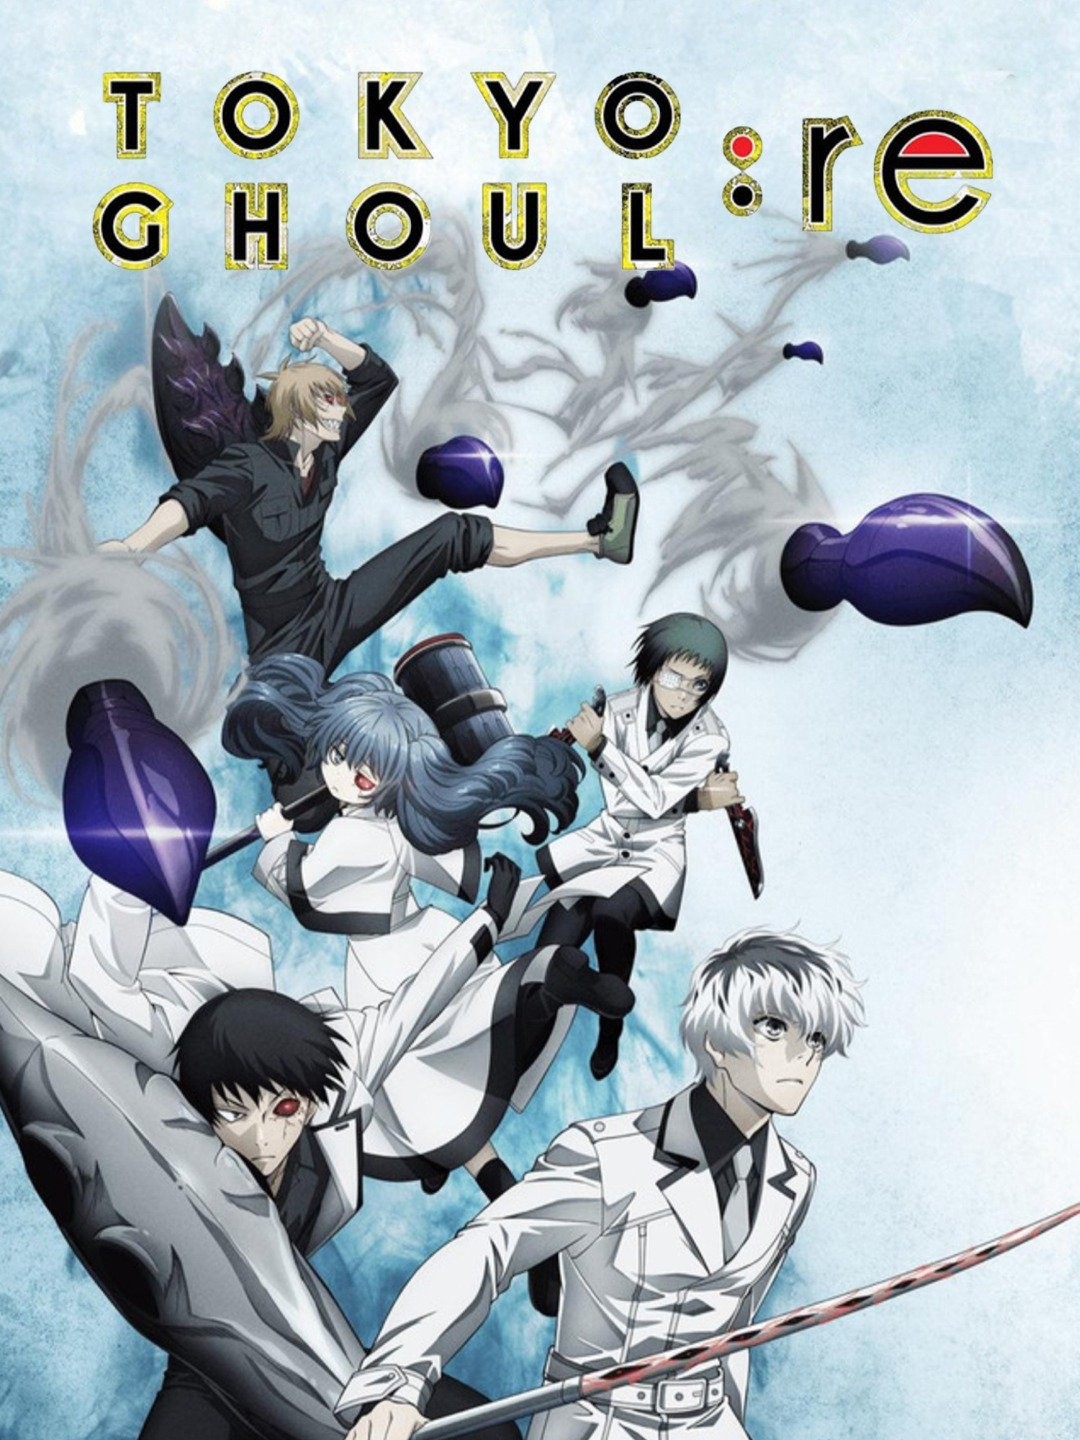 How the 'Tokyo Ghoul' Movie Cast Compares to the Anime Characters